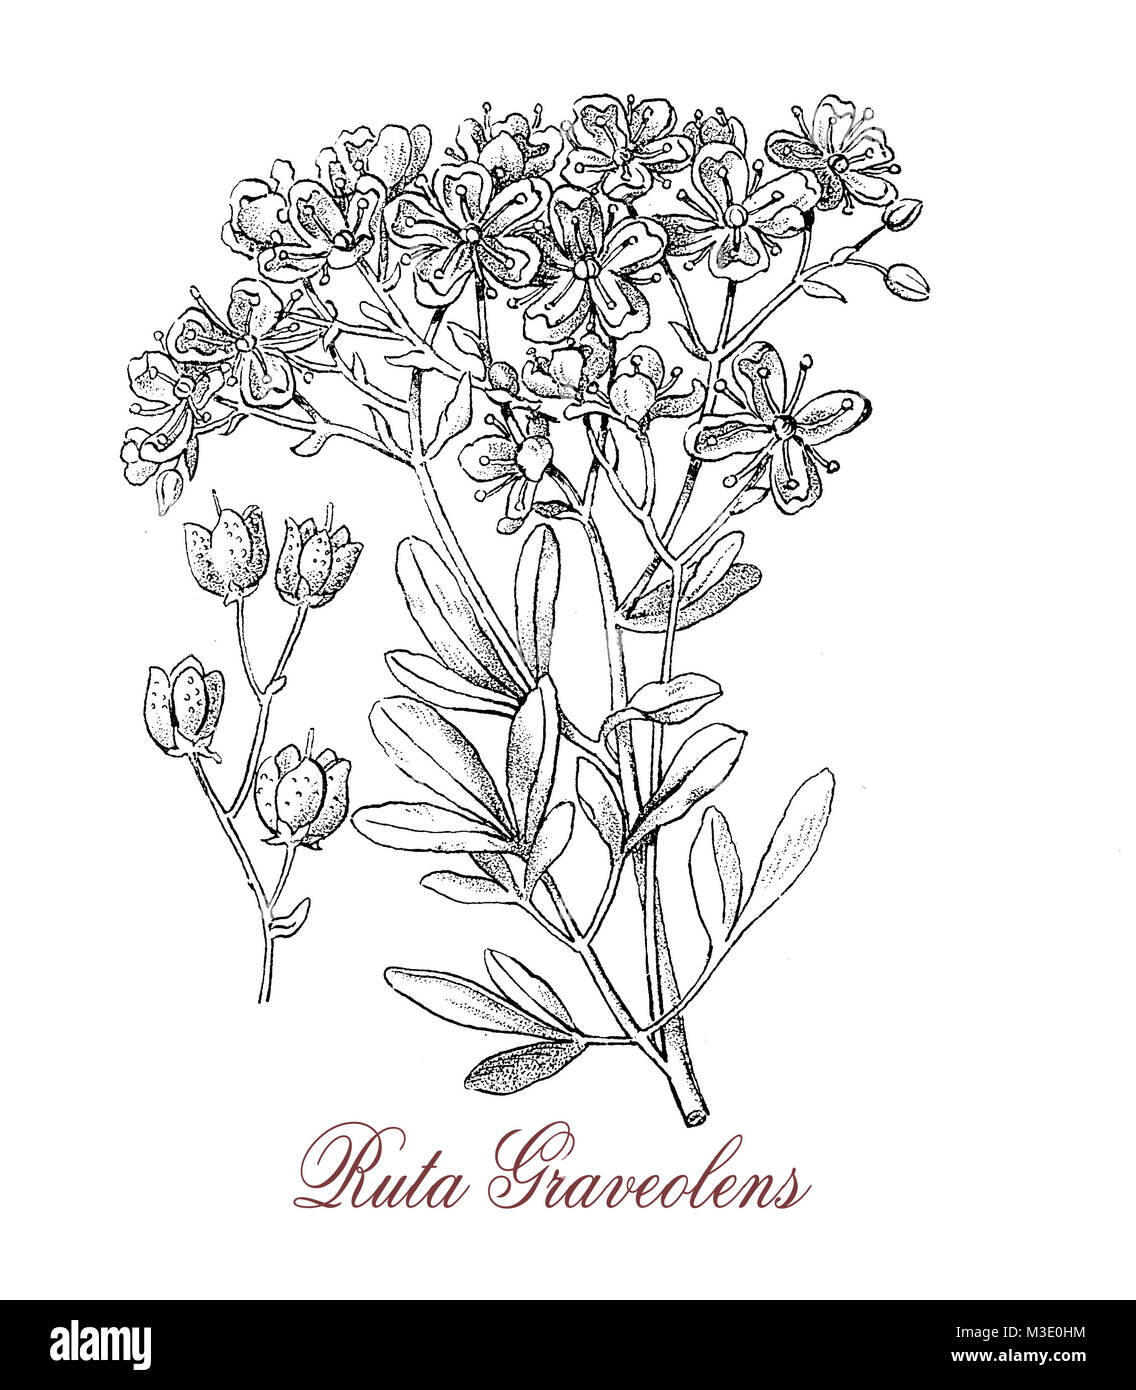 vintage engraving of ruta graveolens, medicinal herb from Balkan peninsula used in East Italy to flavor grappa. Stock Photo